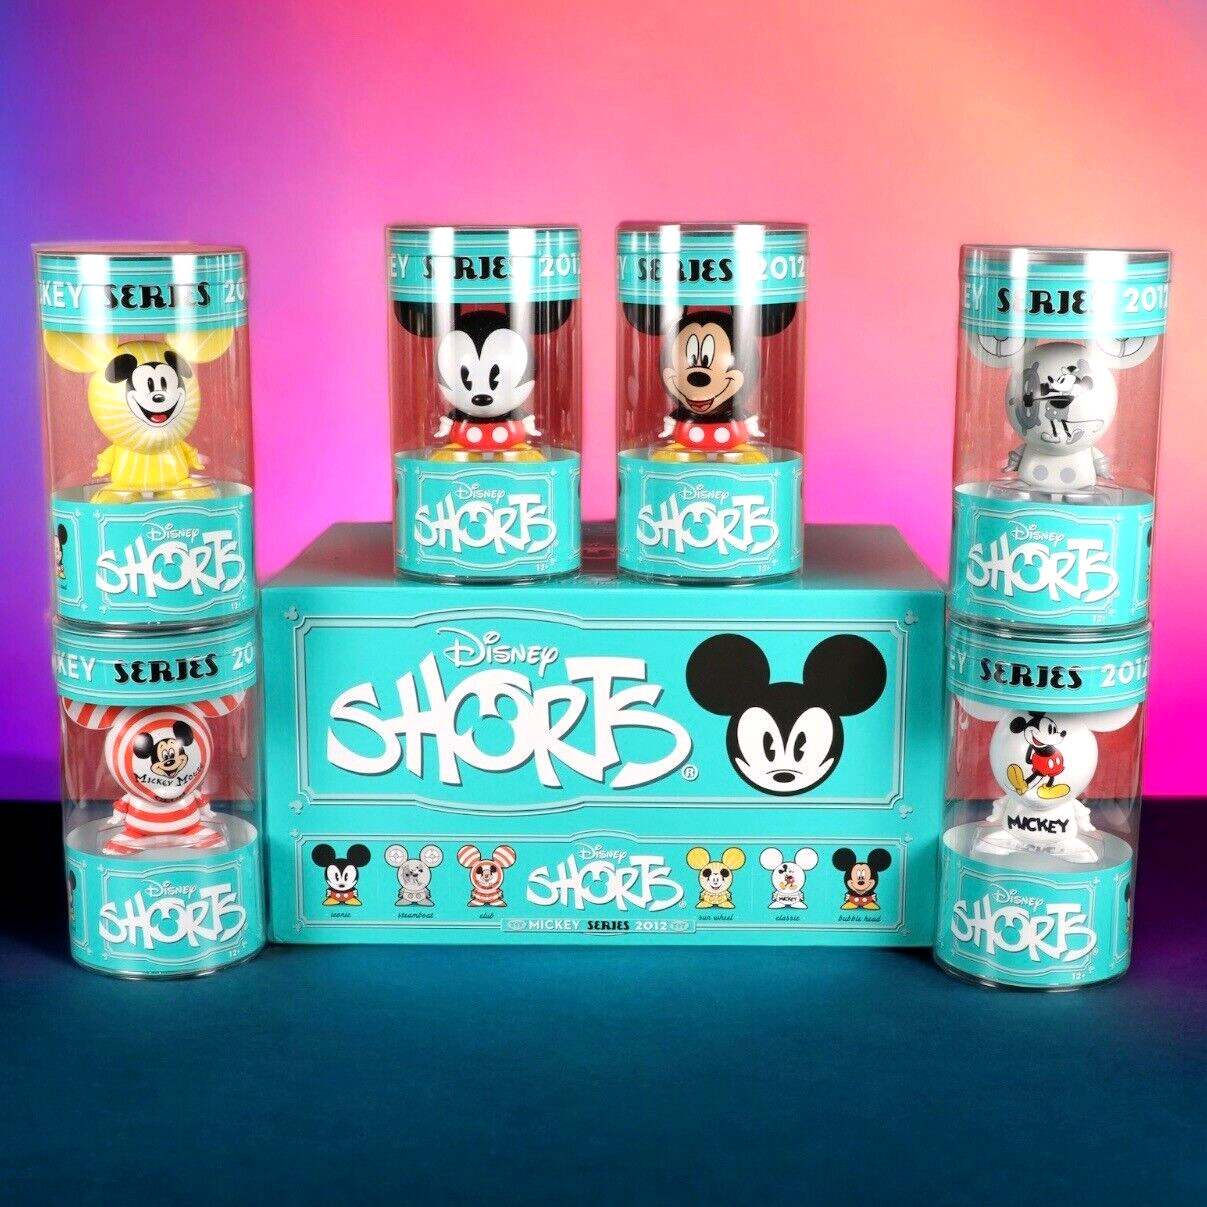 Disney Shorts Mickey Series 2012 Vinyl Figures LE 1000 Box Issue Never Opened